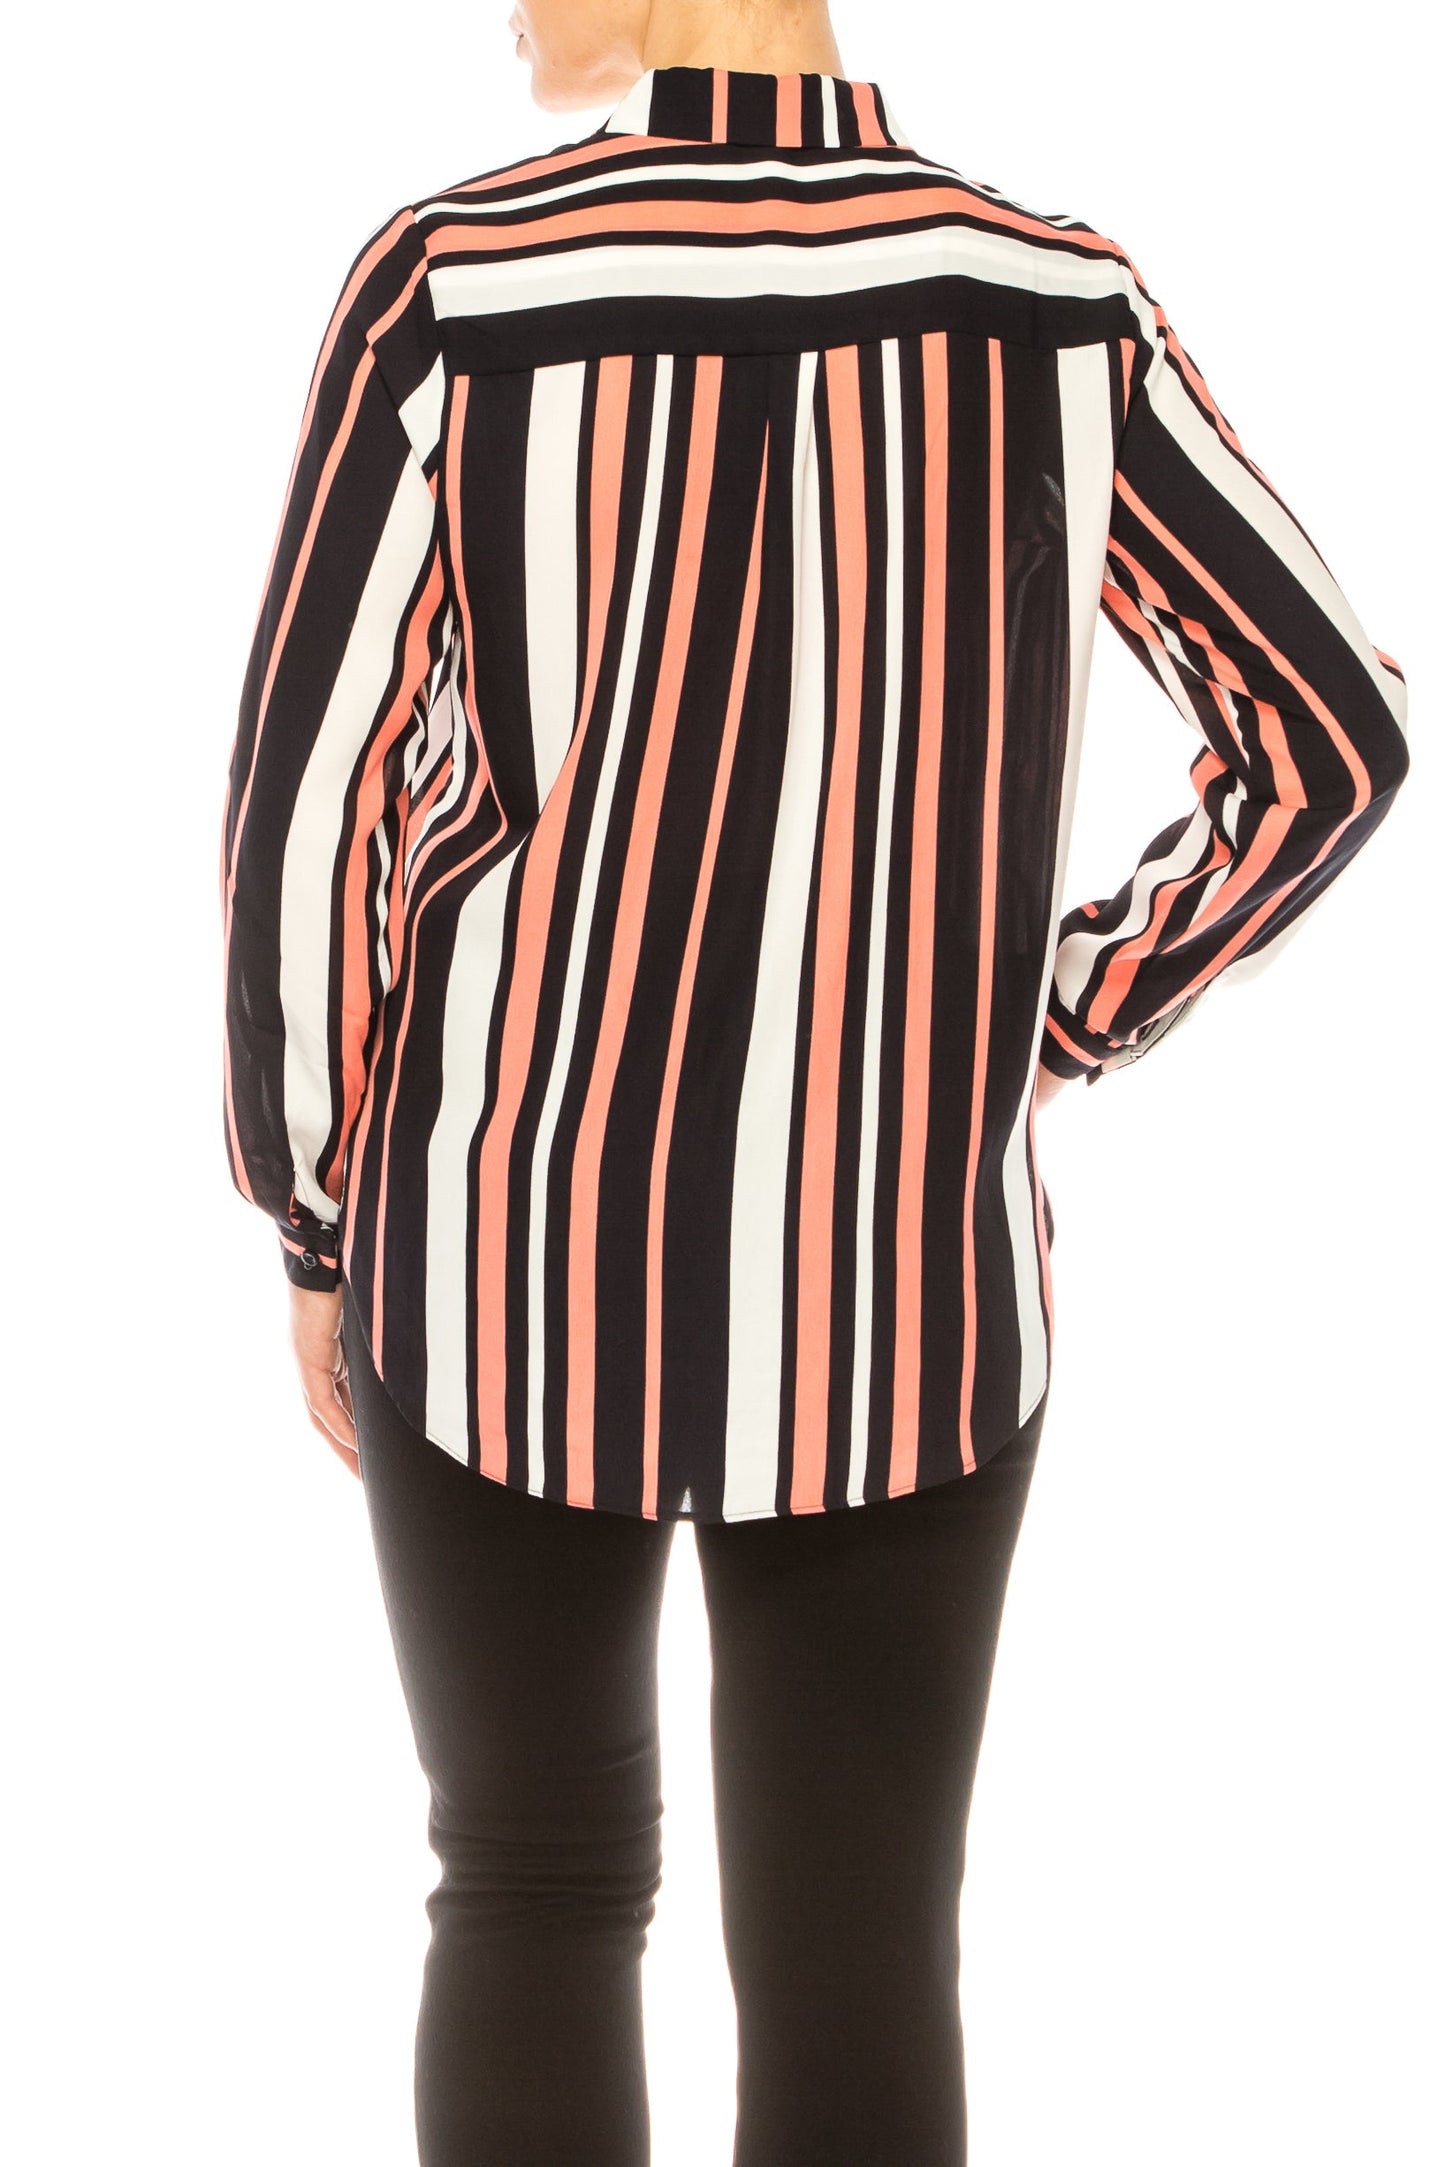 Jessica Rose Button Down 3/4 Sleeve Striped Top